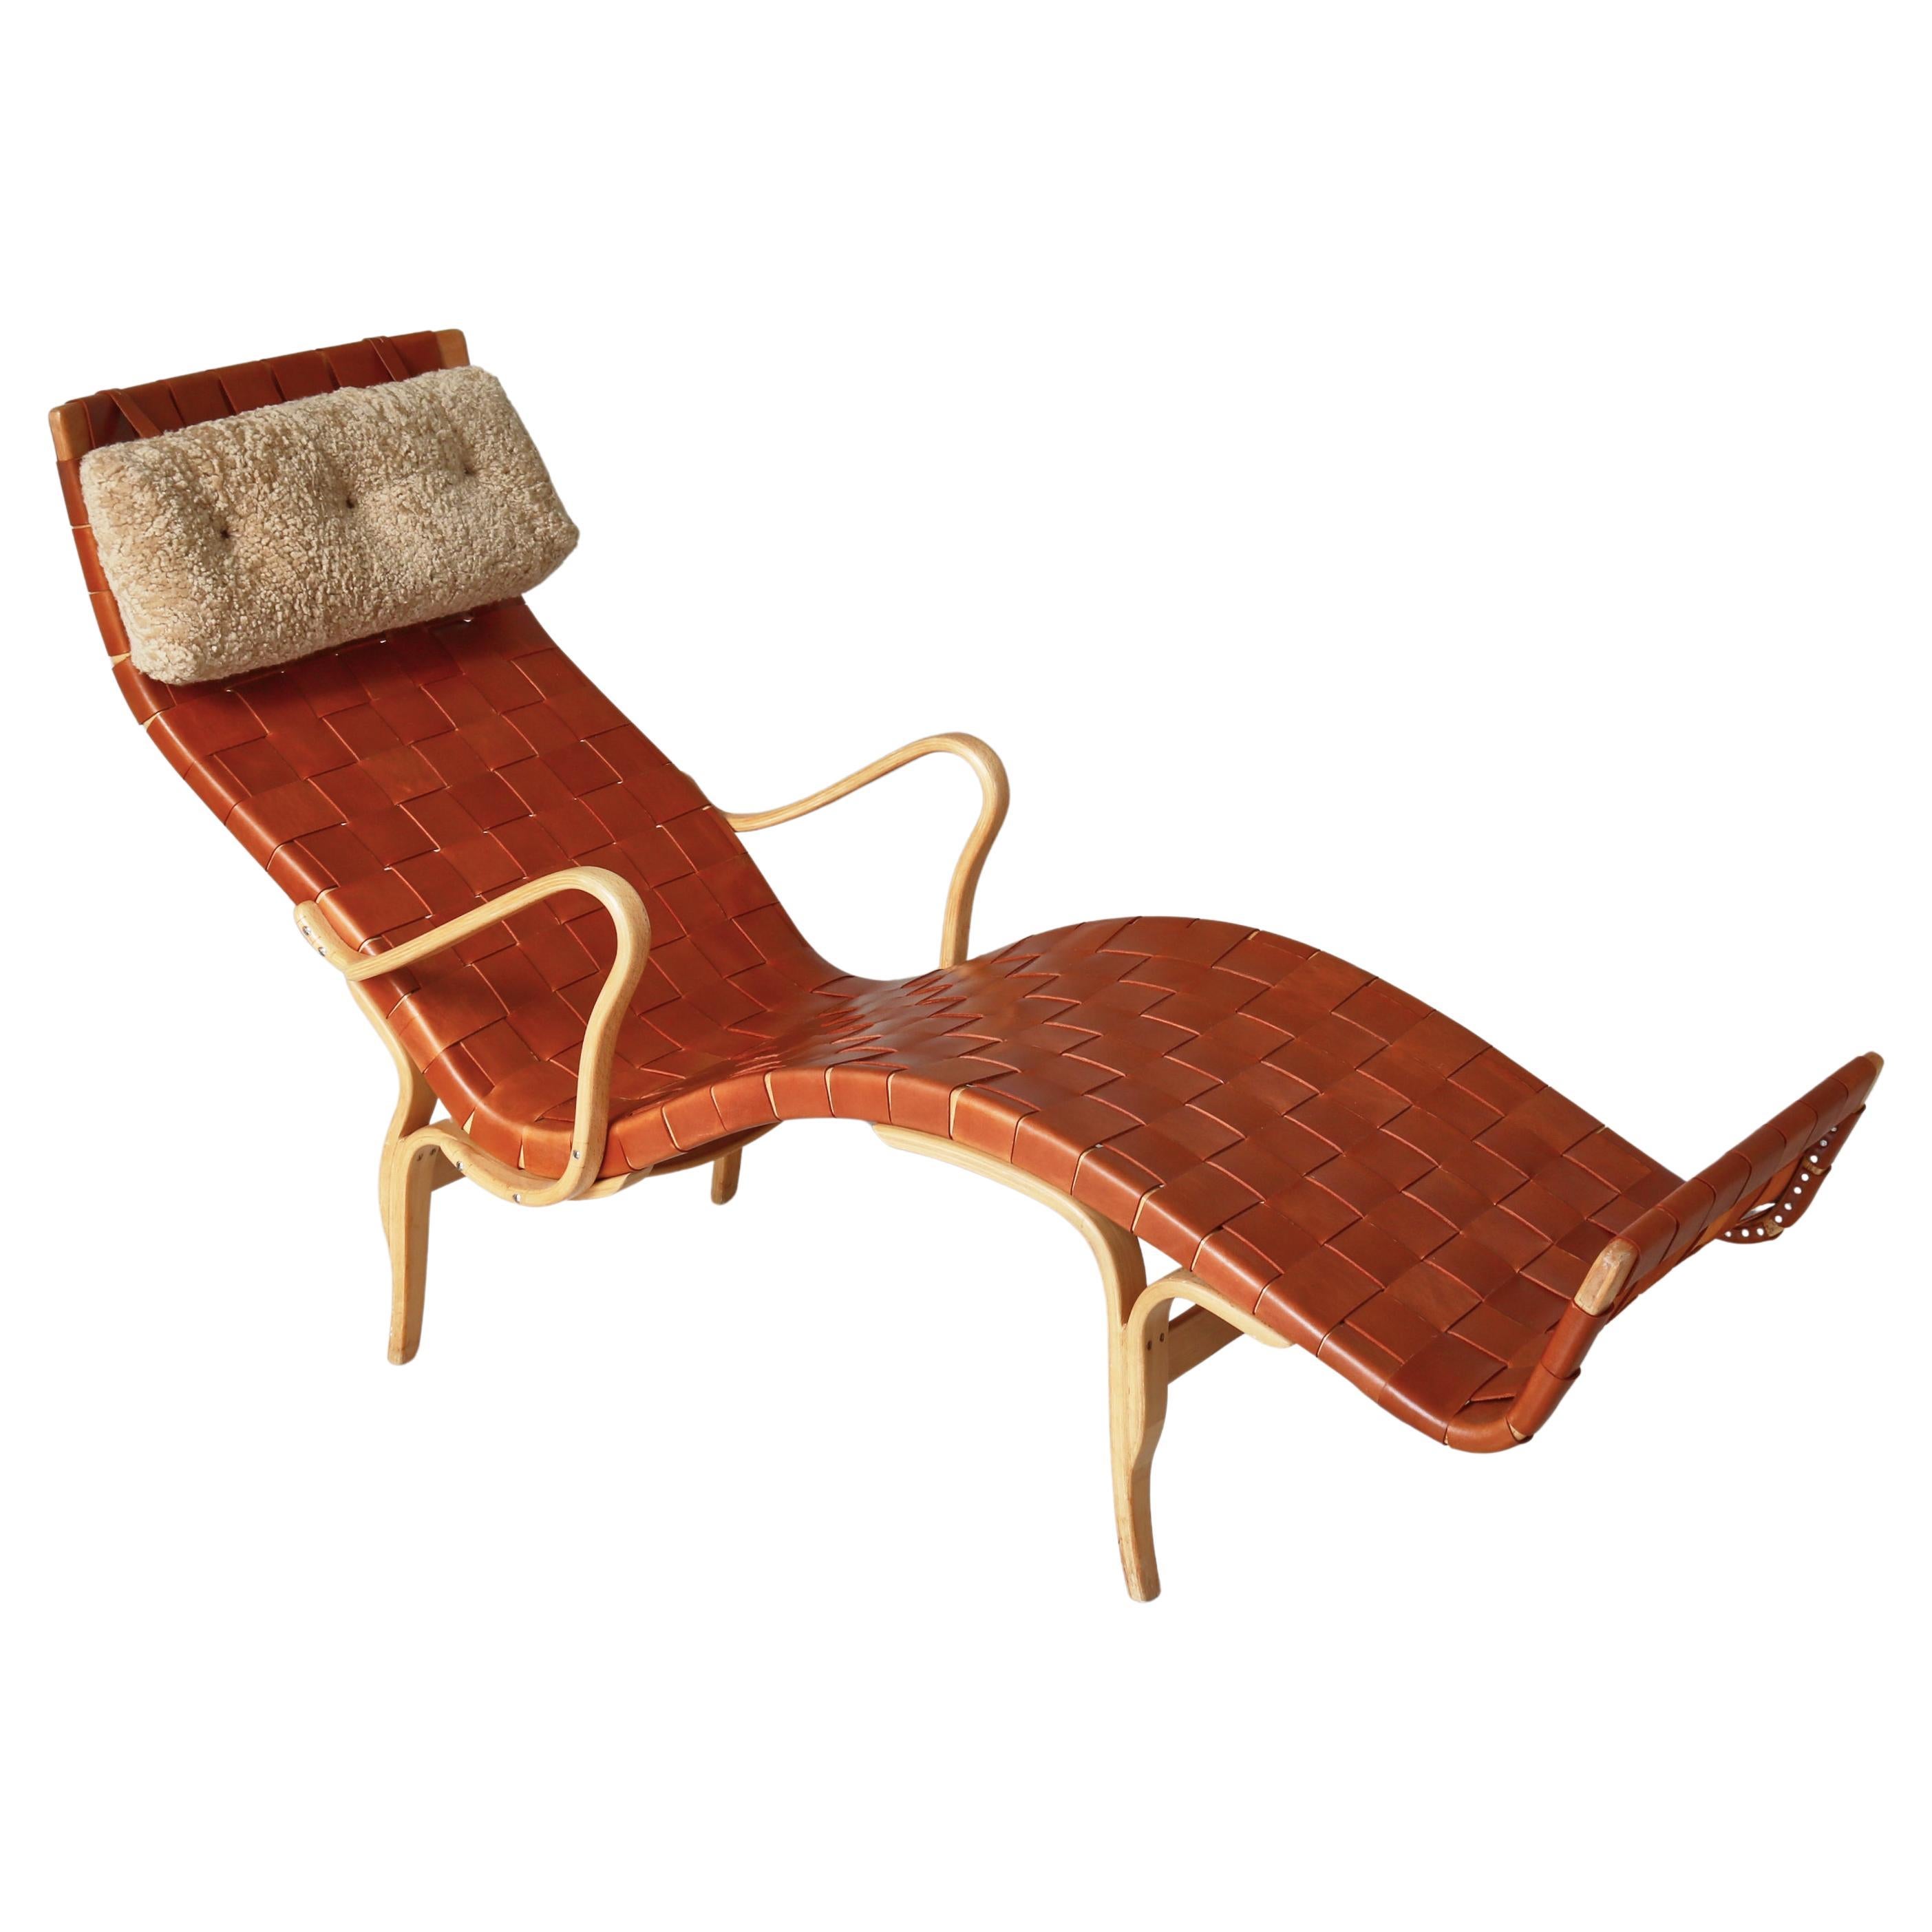 Bruno Mathsson "Pernilla" Chaise Longue Chair in Patinated Saddle Leather, 1964 For Sale